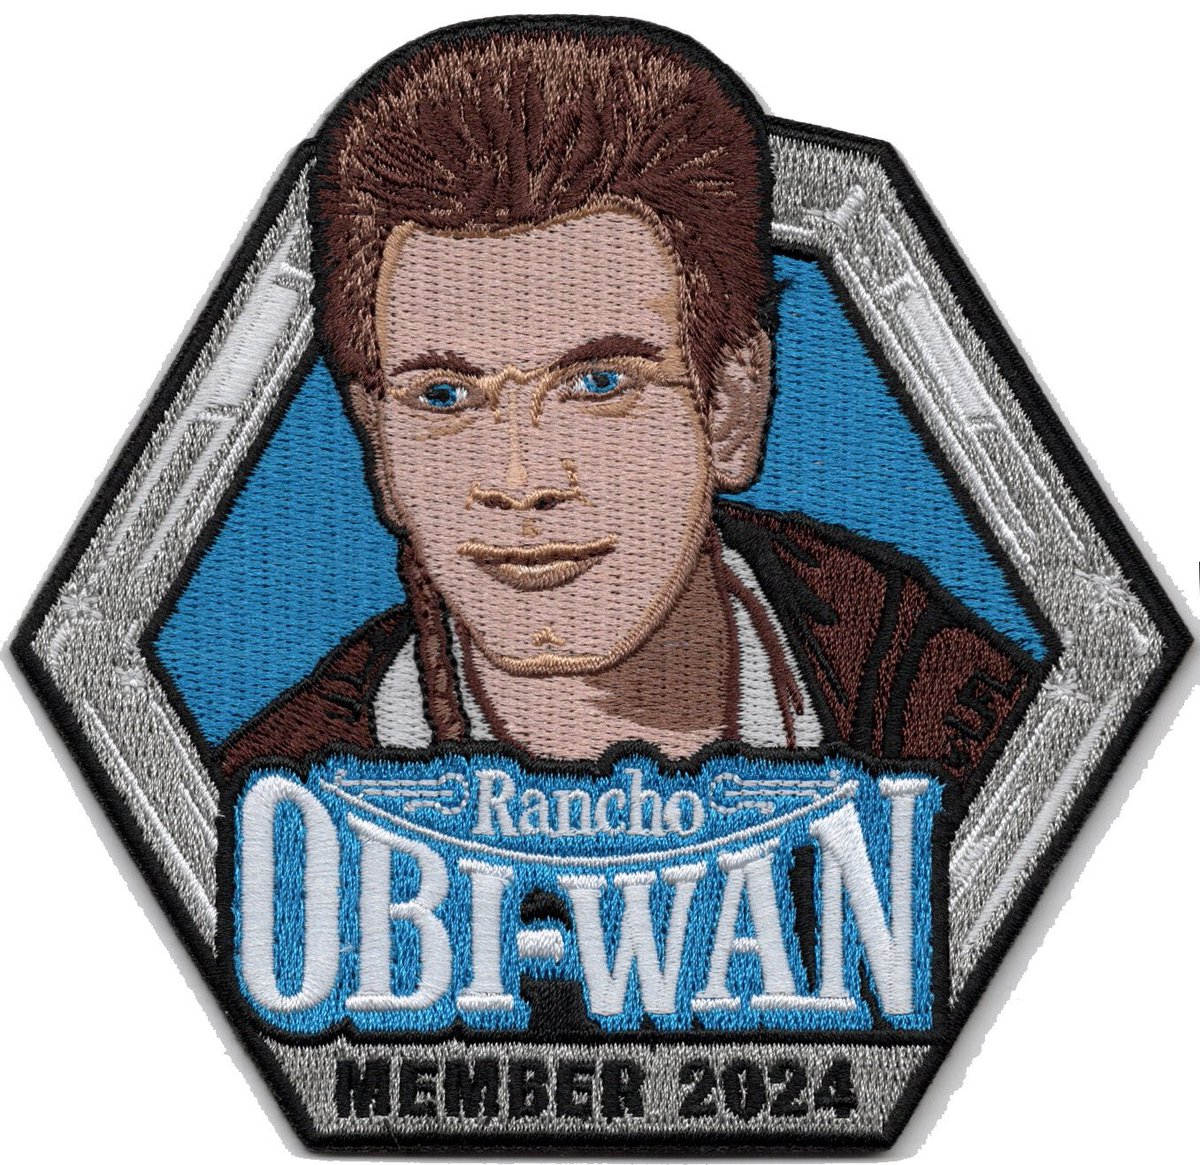 Did you know by becoming a member you get:
•Collectible Rancho Obi-Wan Member Patch
•Personalized Membership card & letter from founder @SteveSansweet 
•Special Members-only 15% discount on Rancho Obi-Wan tour tickets and more! ranchoobiwan.org/memberships/ #ThanksForYourSupport